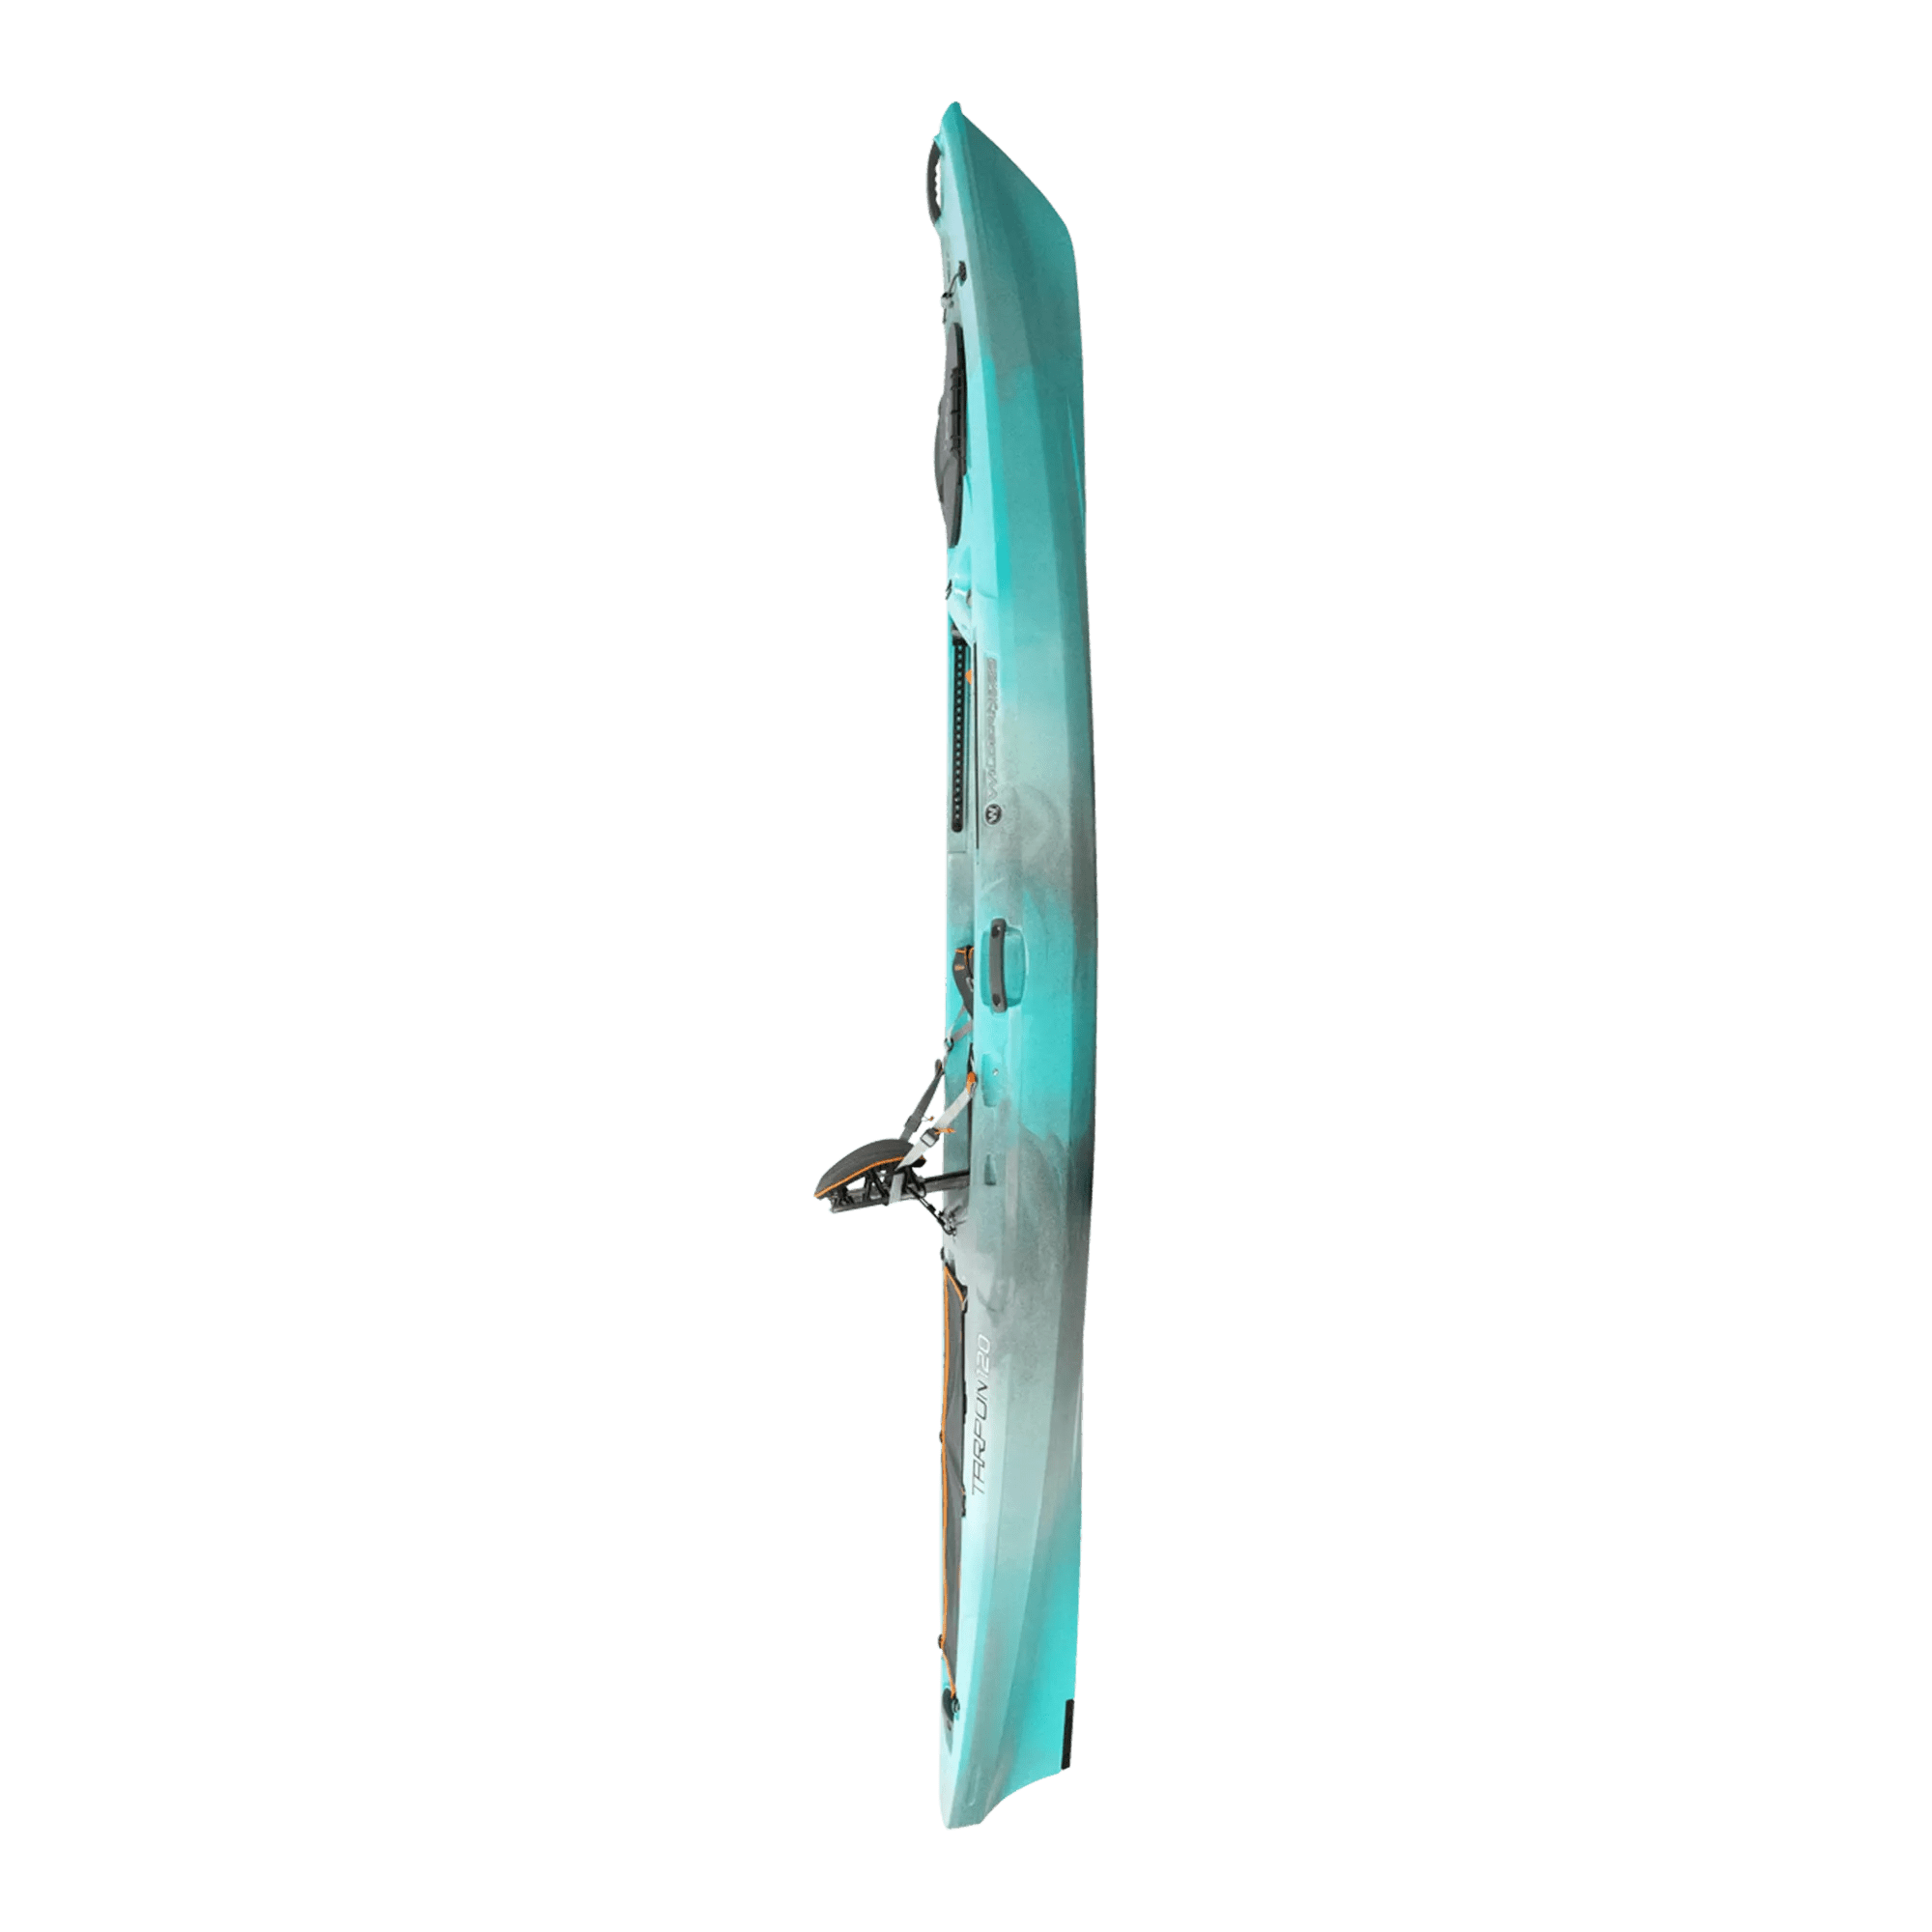 WILDERNESS SYSTEMS - Tarpon 120 Fishing Kayak - Discontinued color/model - Blue - 9750210179 - SIDE